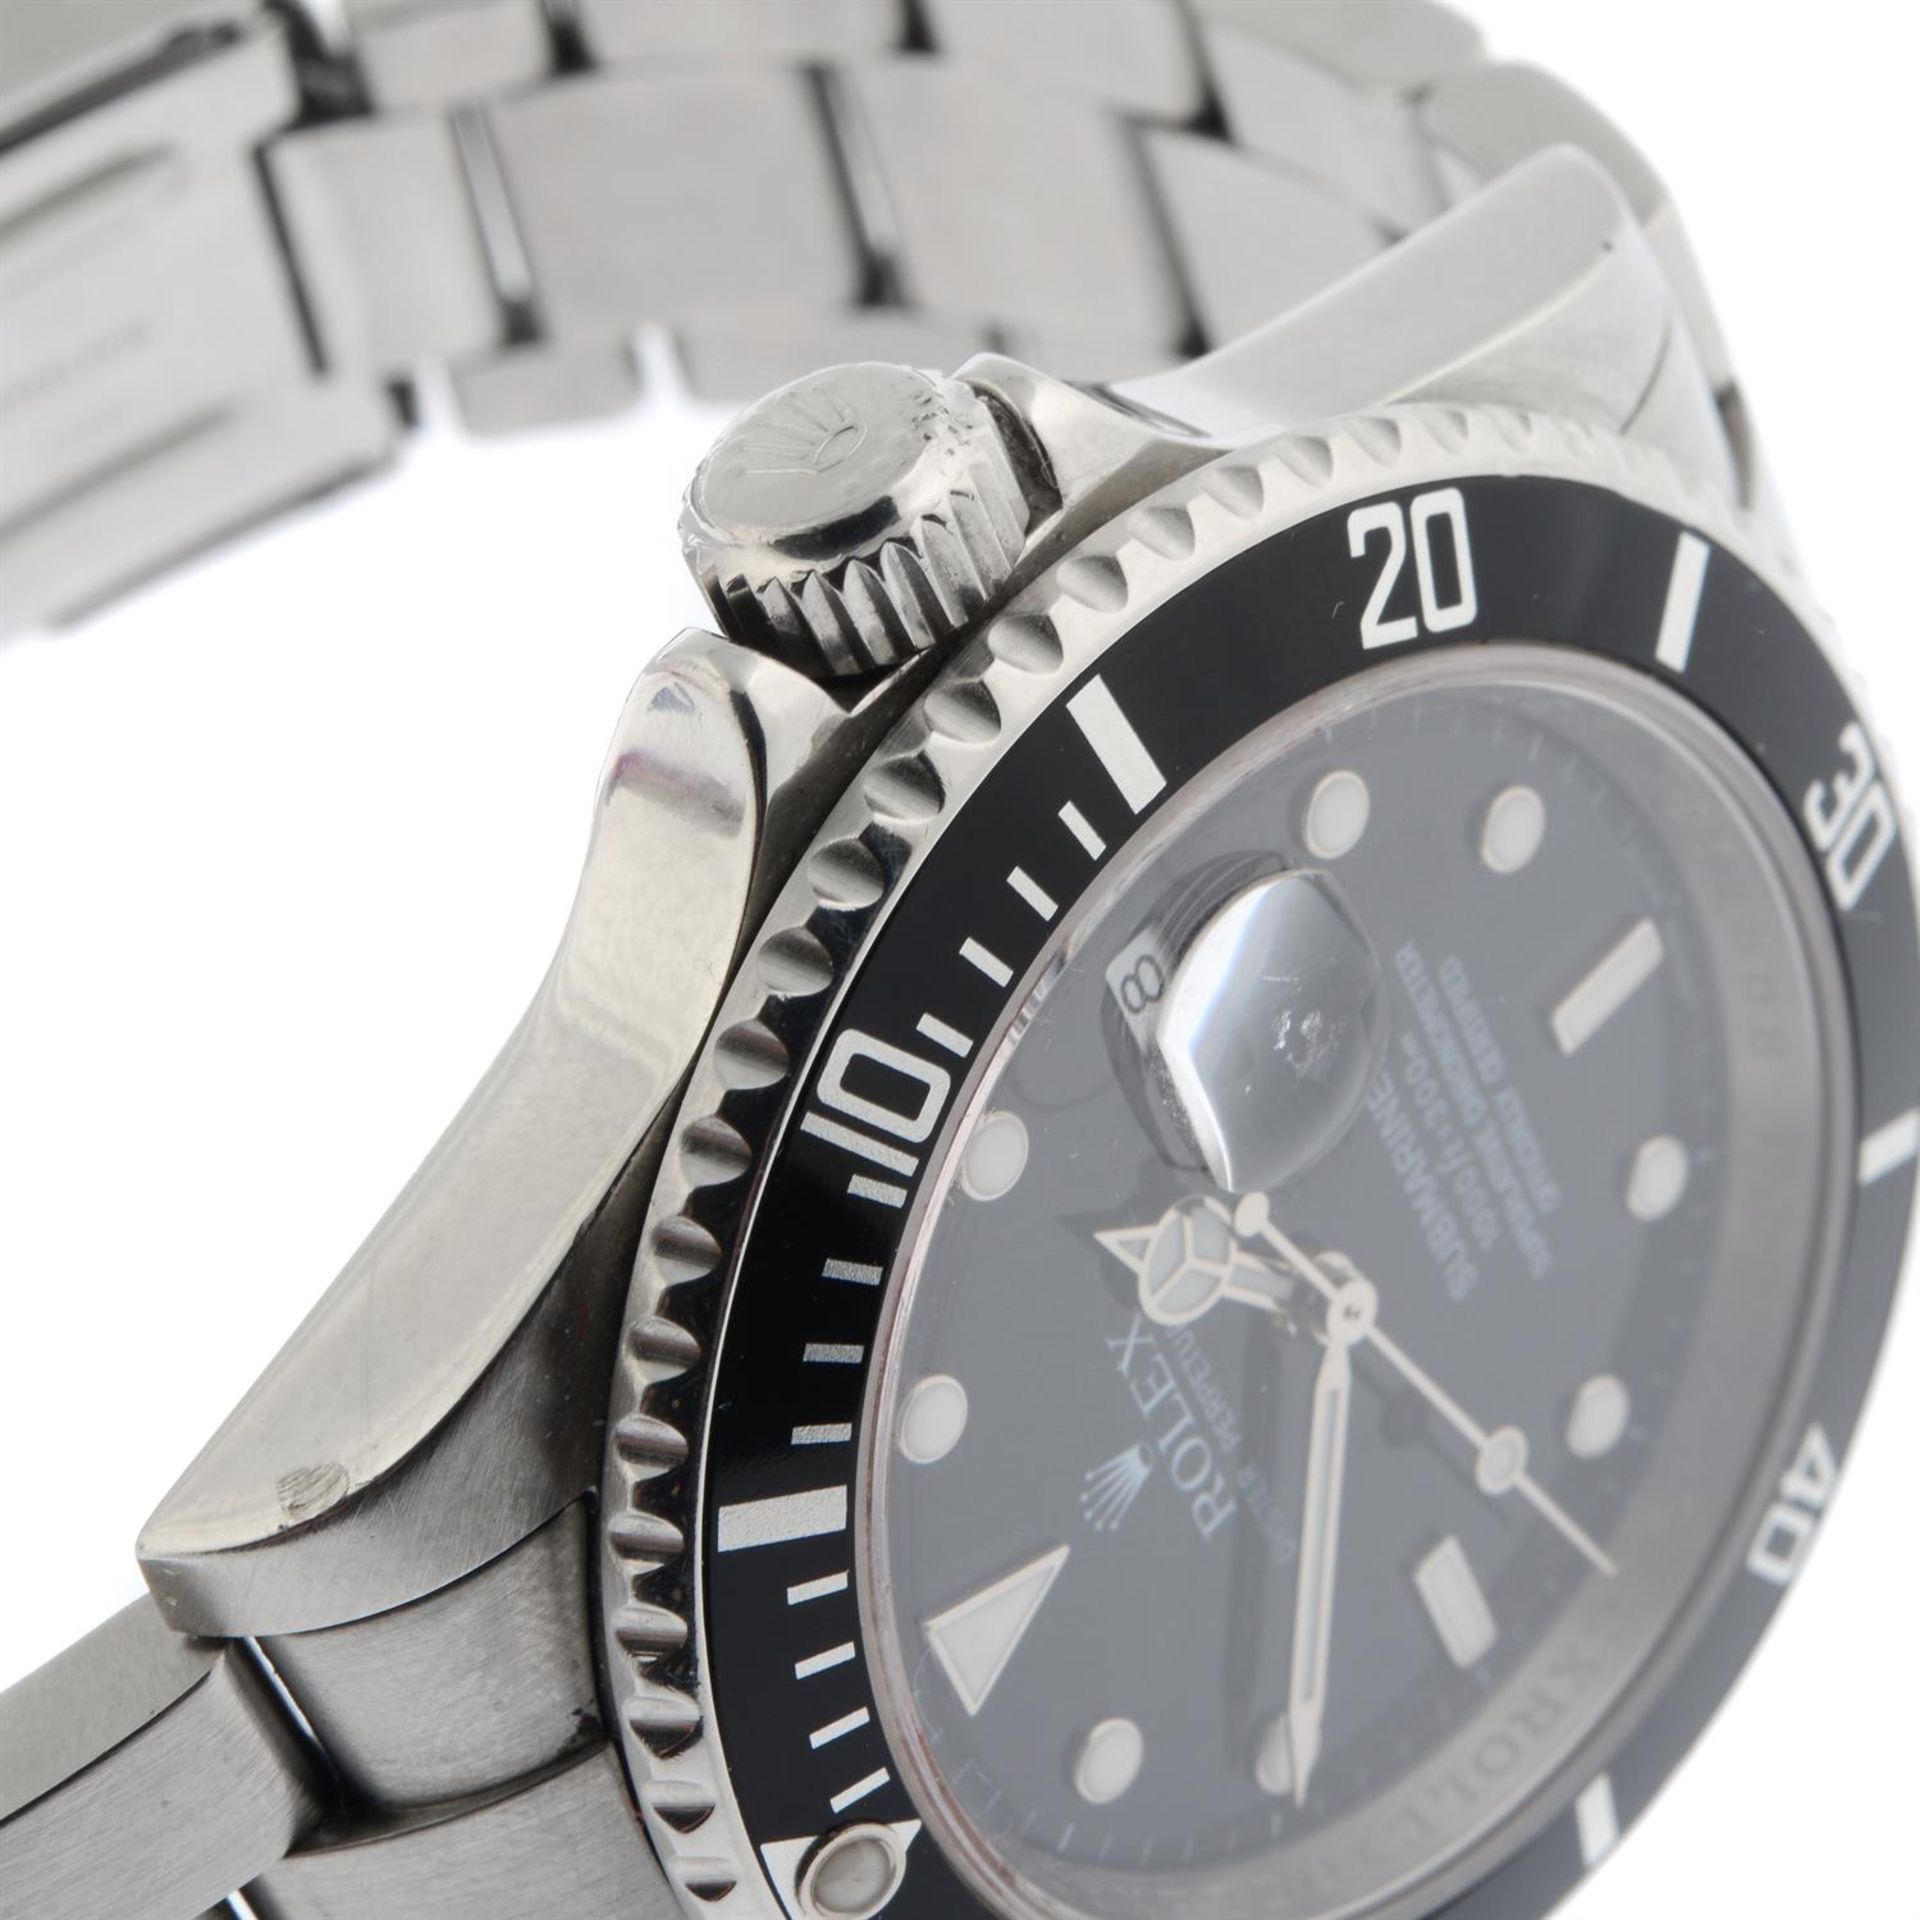 ROLEX - a stainless steel Oyster Perpetual Submariner bracelet watch, 40mm. - Image 4 of 5